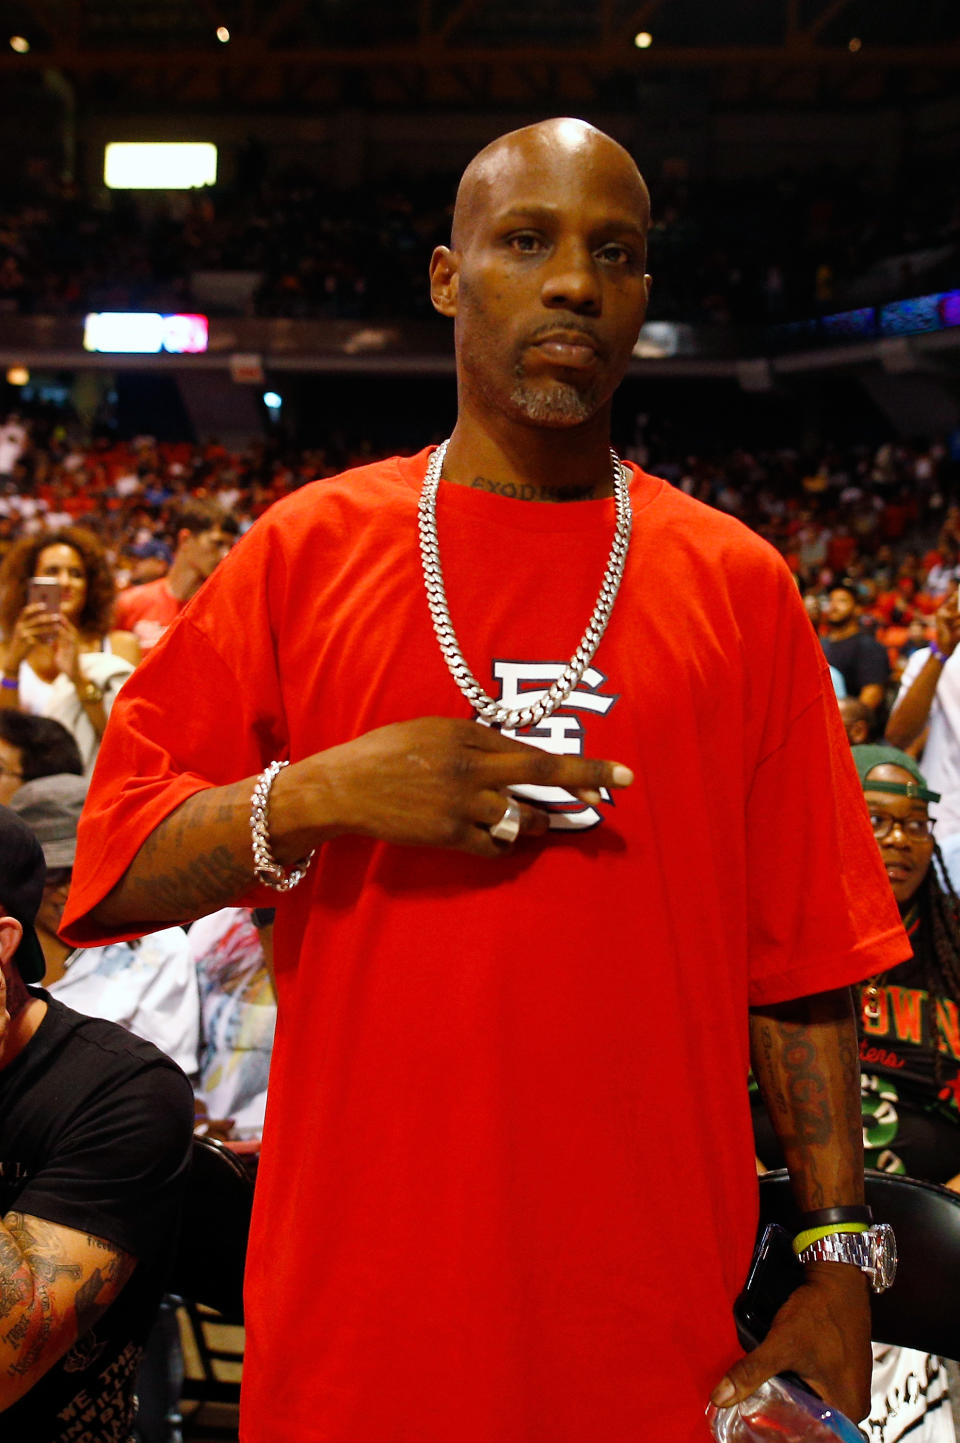 CHICAGO, IL – JULY 23: Rapper DMX poses for a photo during week five of the BIG3 three on three basketball league at UIC Pavilion on July 23, 2017 in Chicago, Illinois. (Photo by Michael Hickey/BIG3/Getty Images)